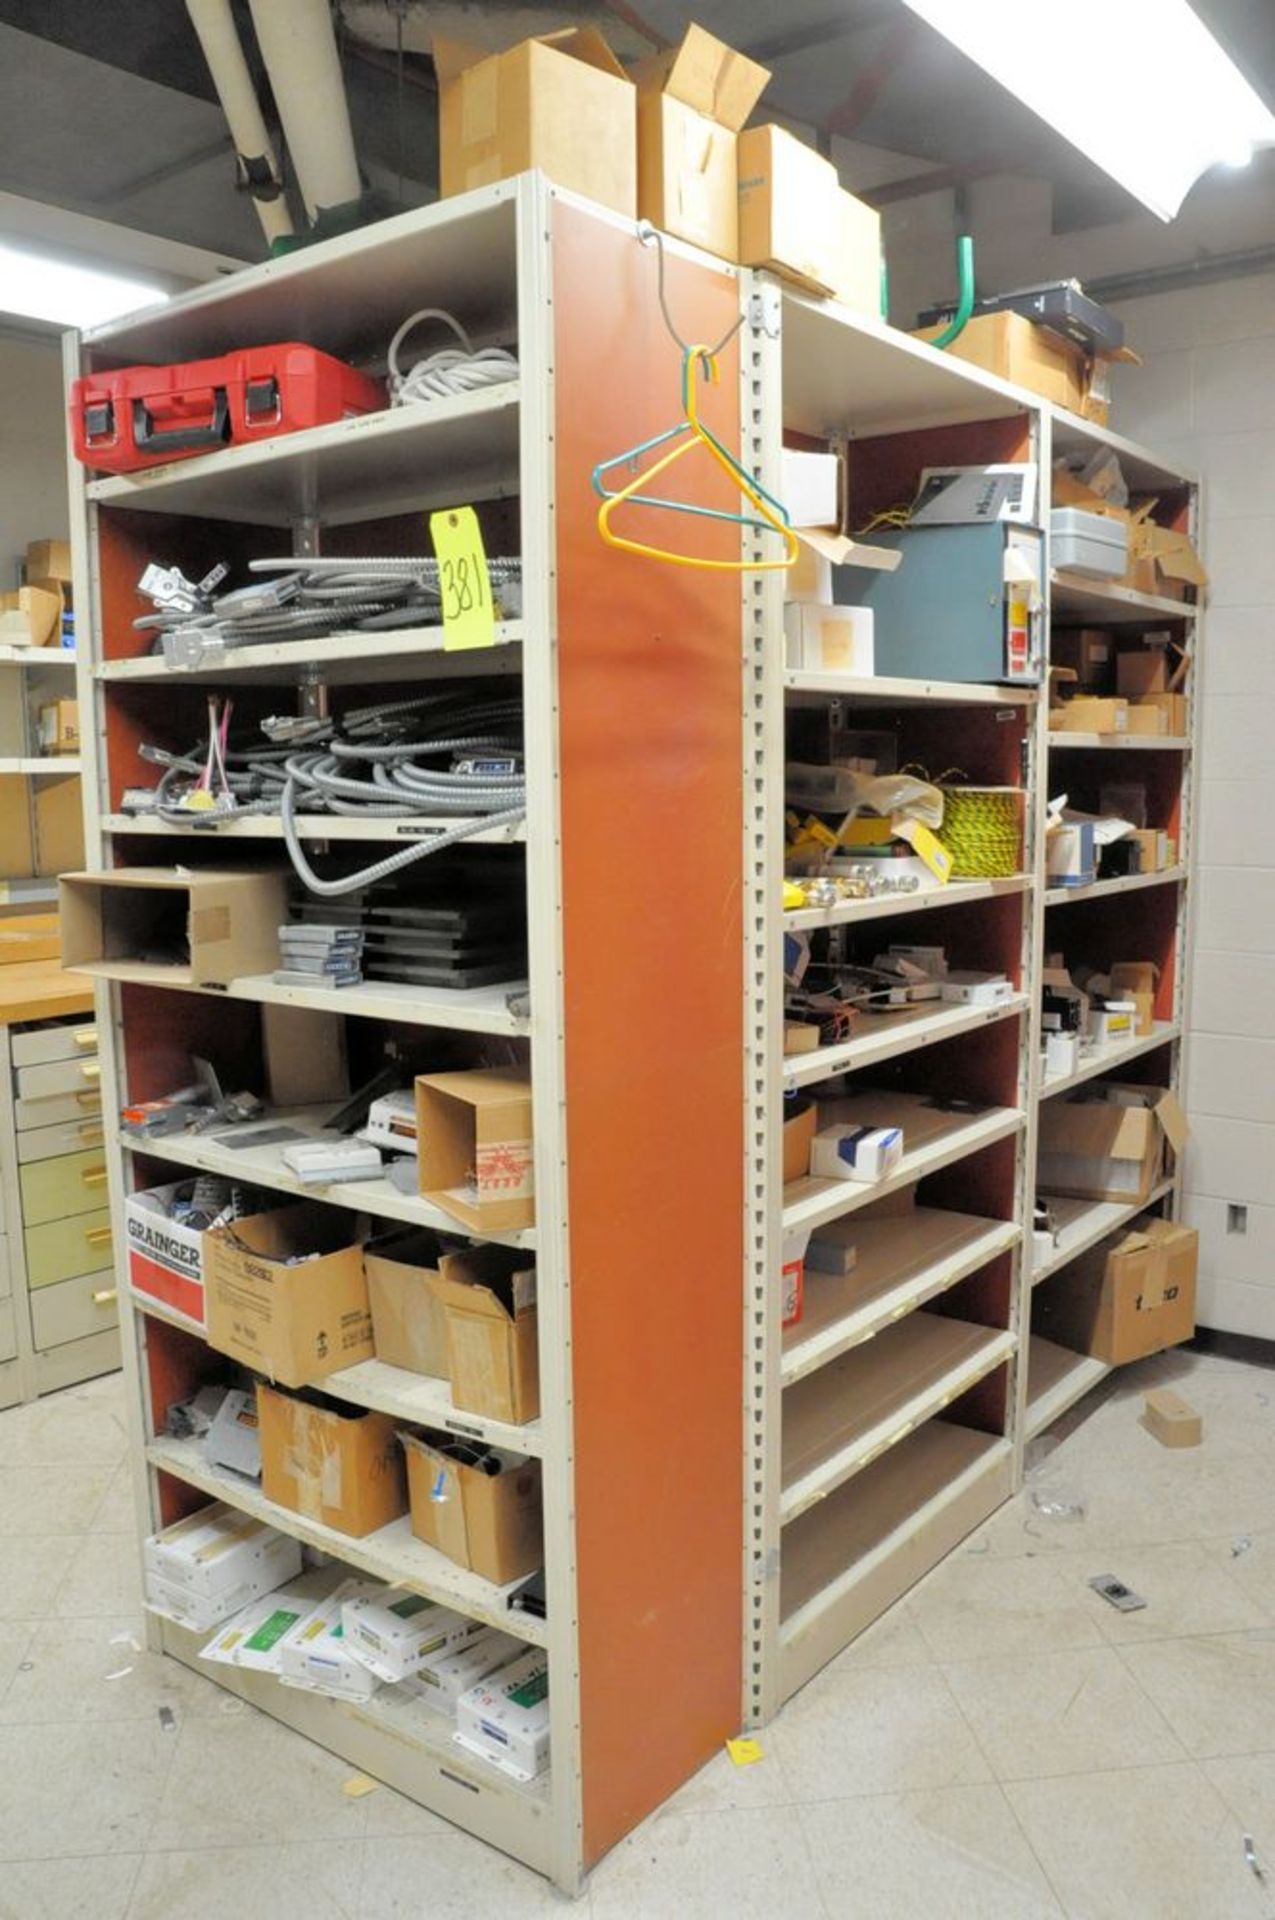 Lot-(5) Sections Shelving with General Maintenance Contents in (1) Group, (Maintenance Shop-